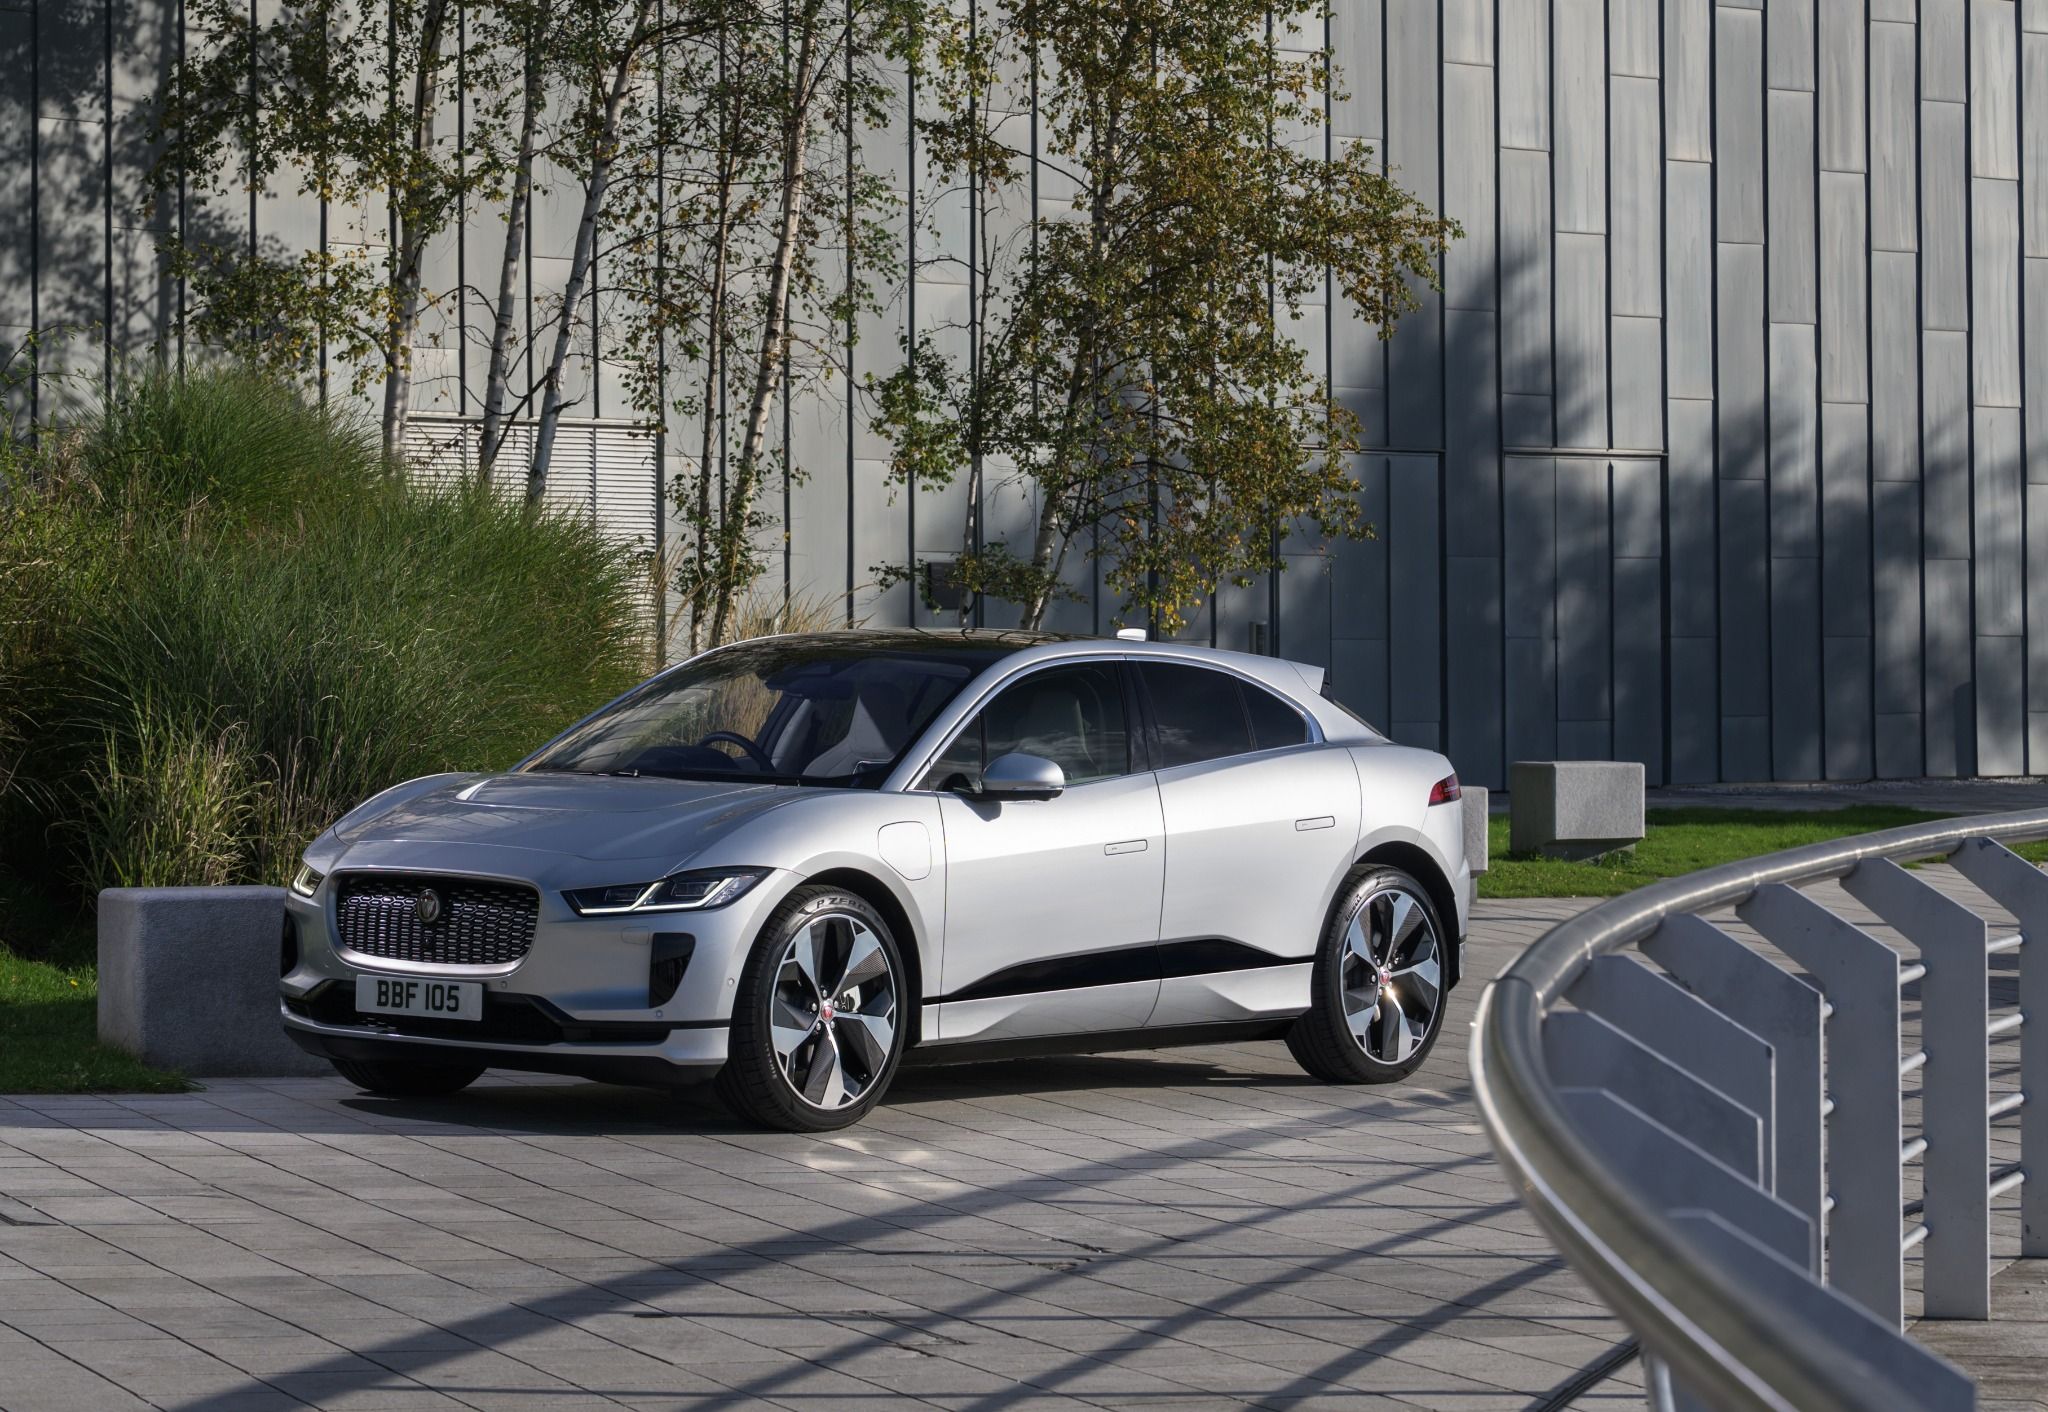 Review of the Jaguar I-Pace image